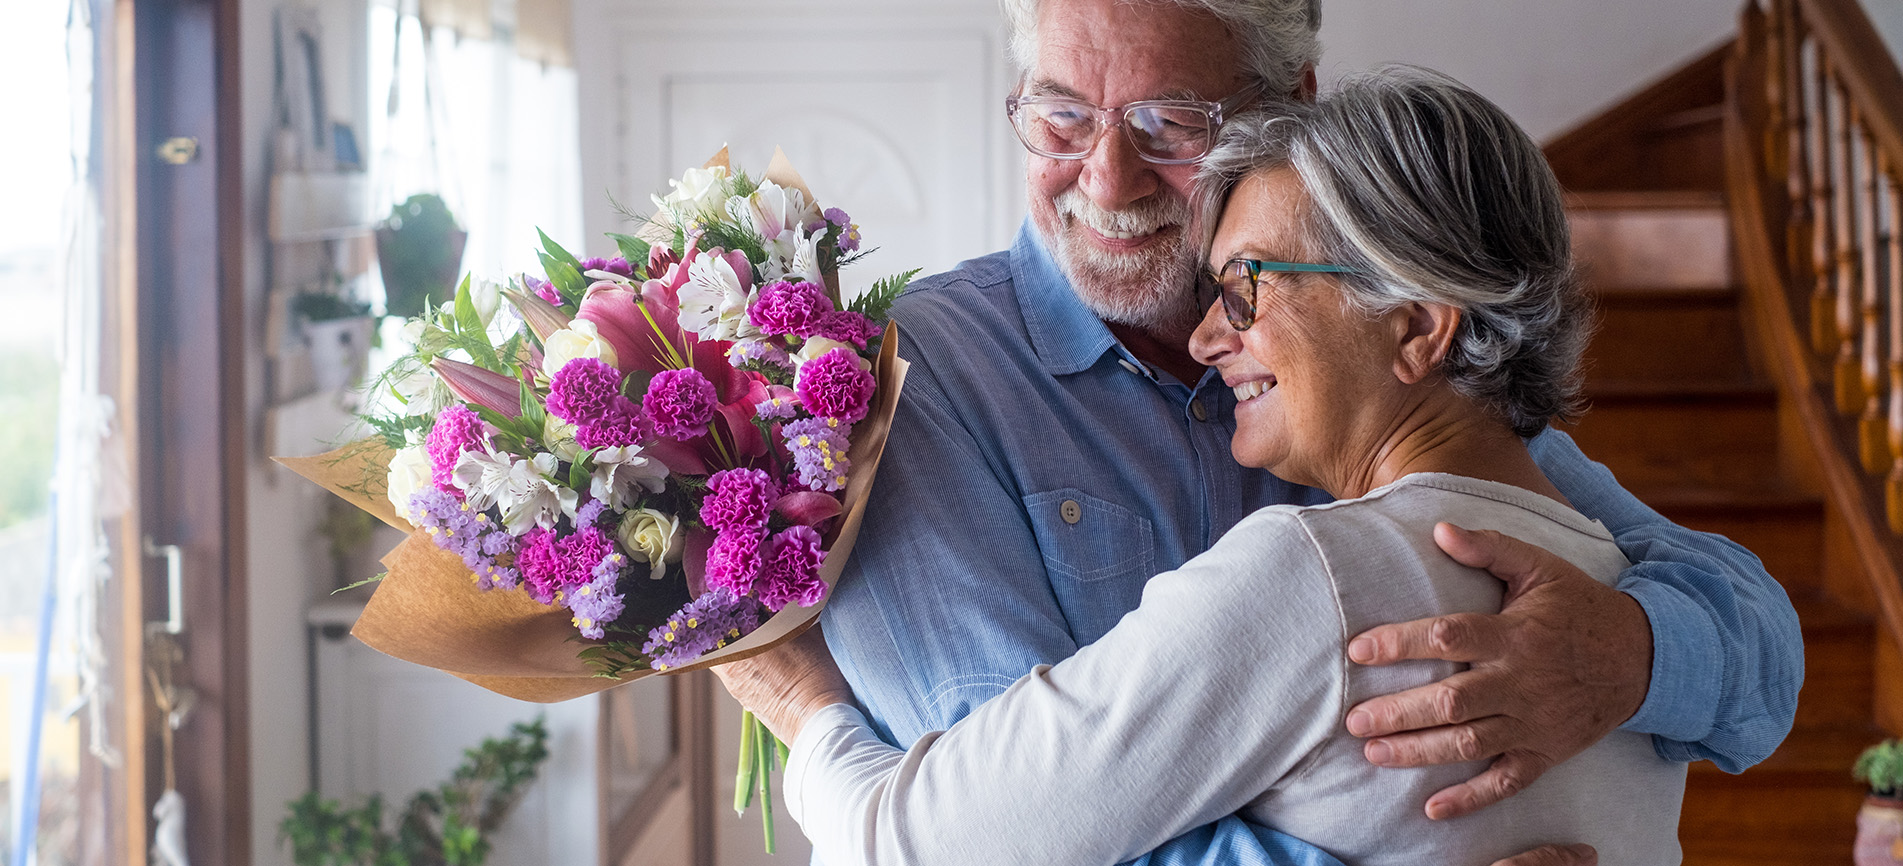 An older man presents an older woman a bouquet of flowers as they embrace in a brightly-lit room.